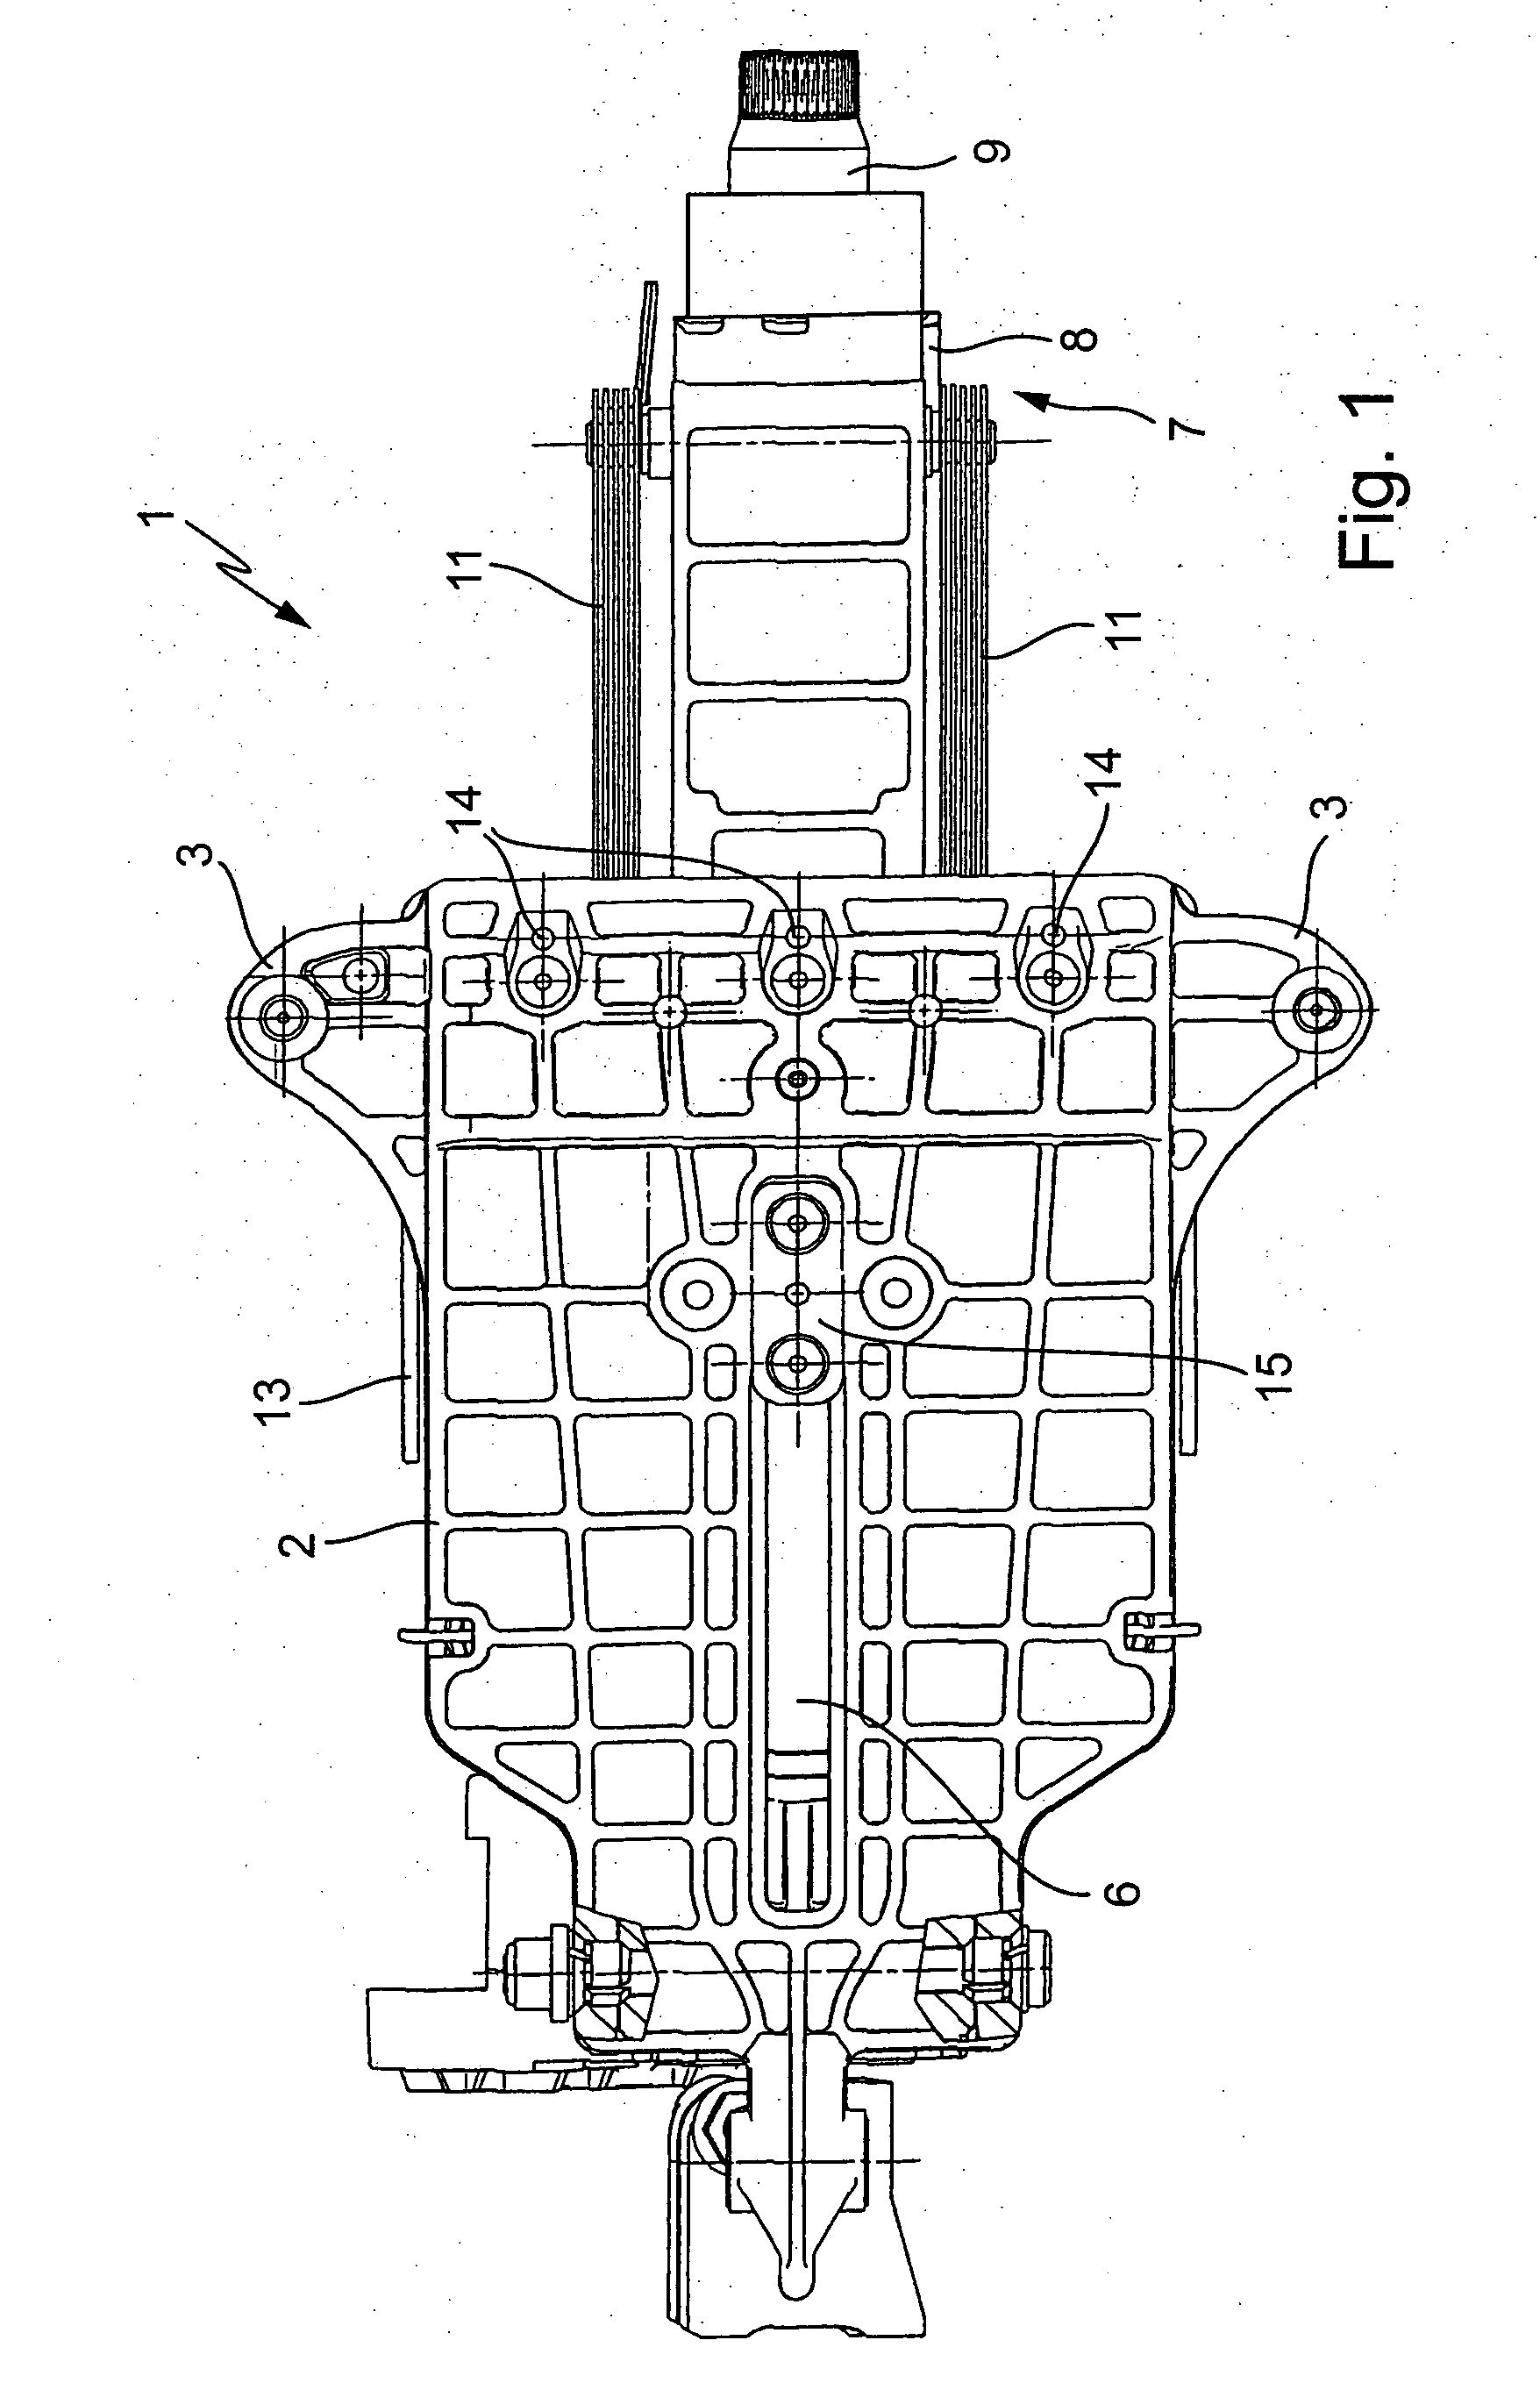 Steering Column Assembly Comprising A Steering Column The Tilt And Length Of Which Can Be Modified